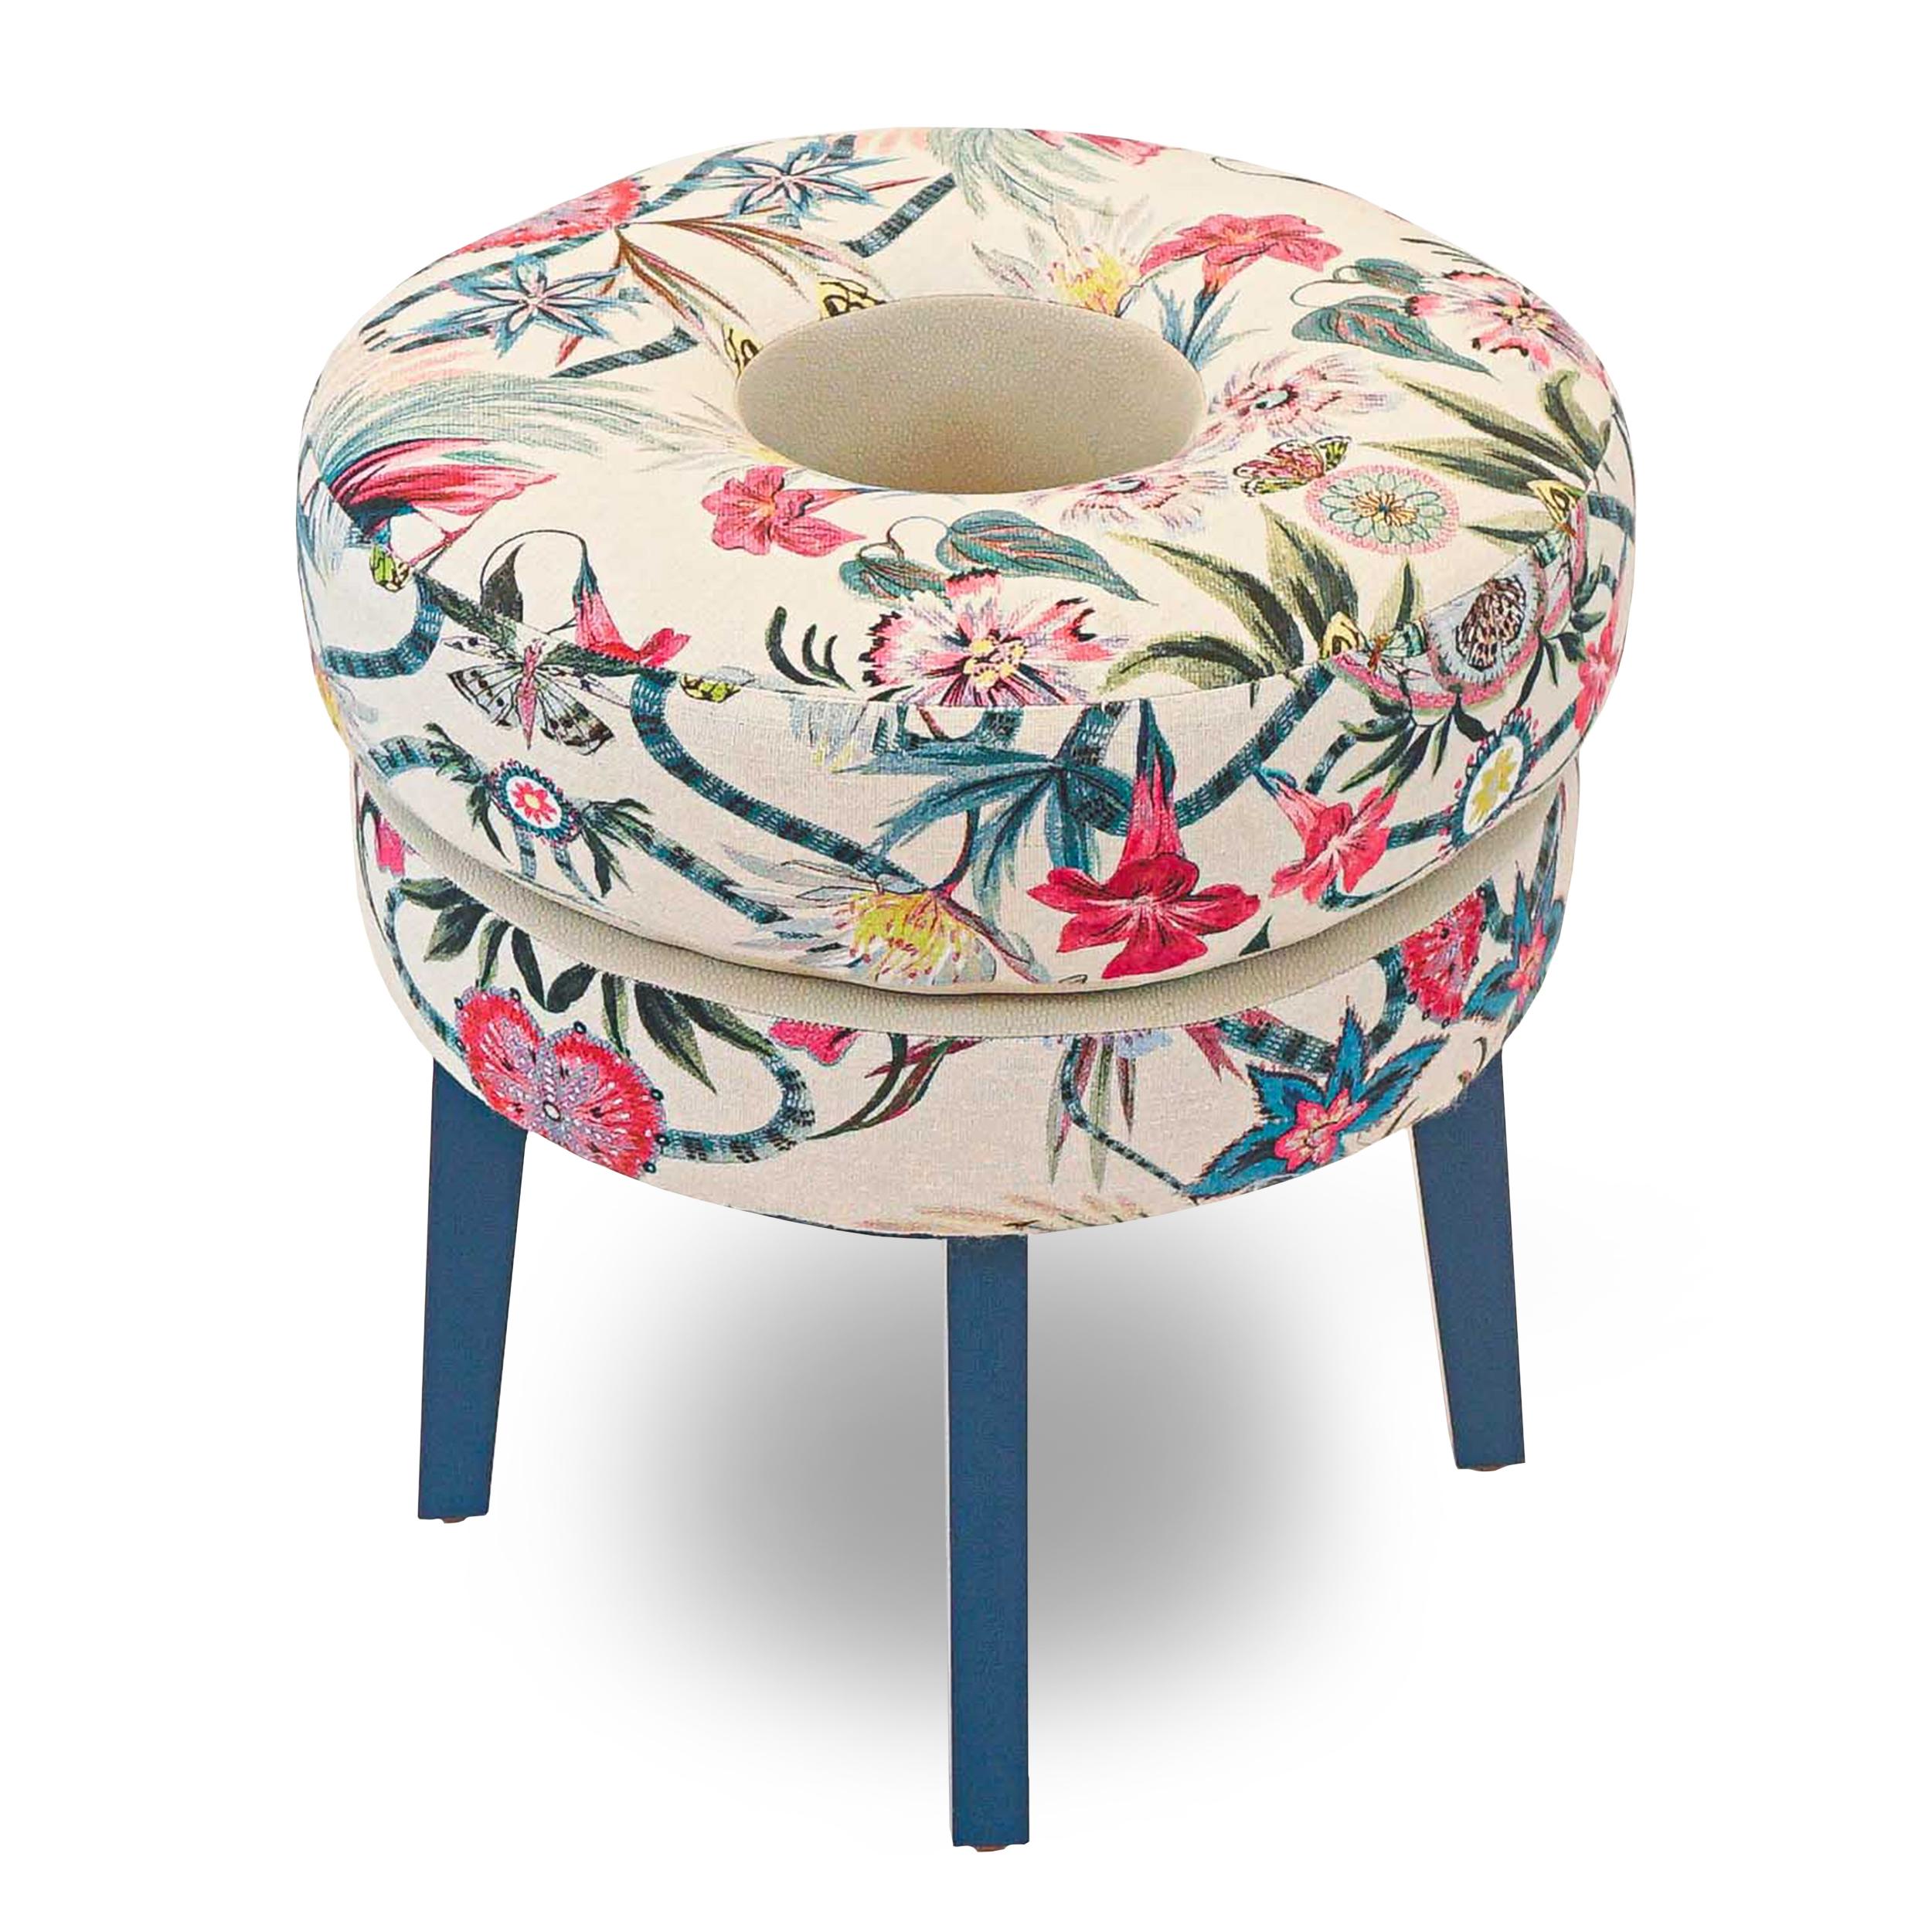 American Floral Print Small Round Stool For Sale